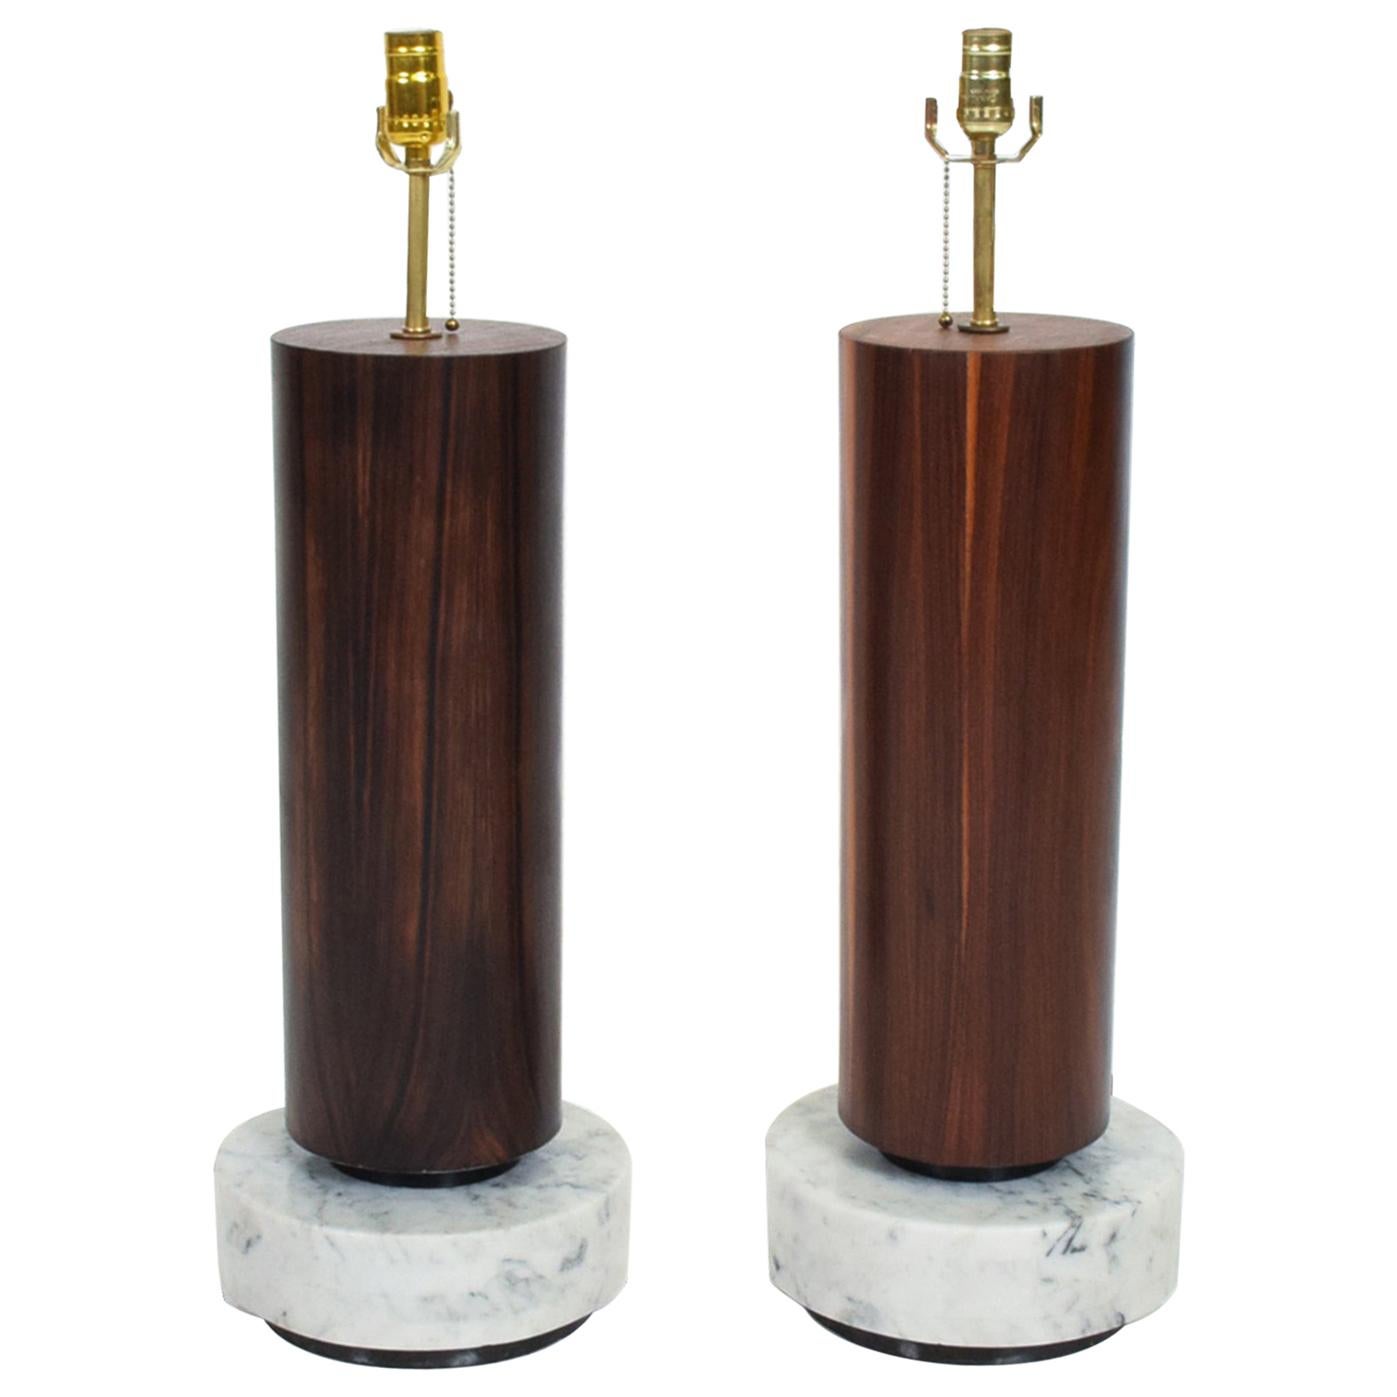 1960s Tall Cylinder Table Lamps Marble & Rosewood Mexico City